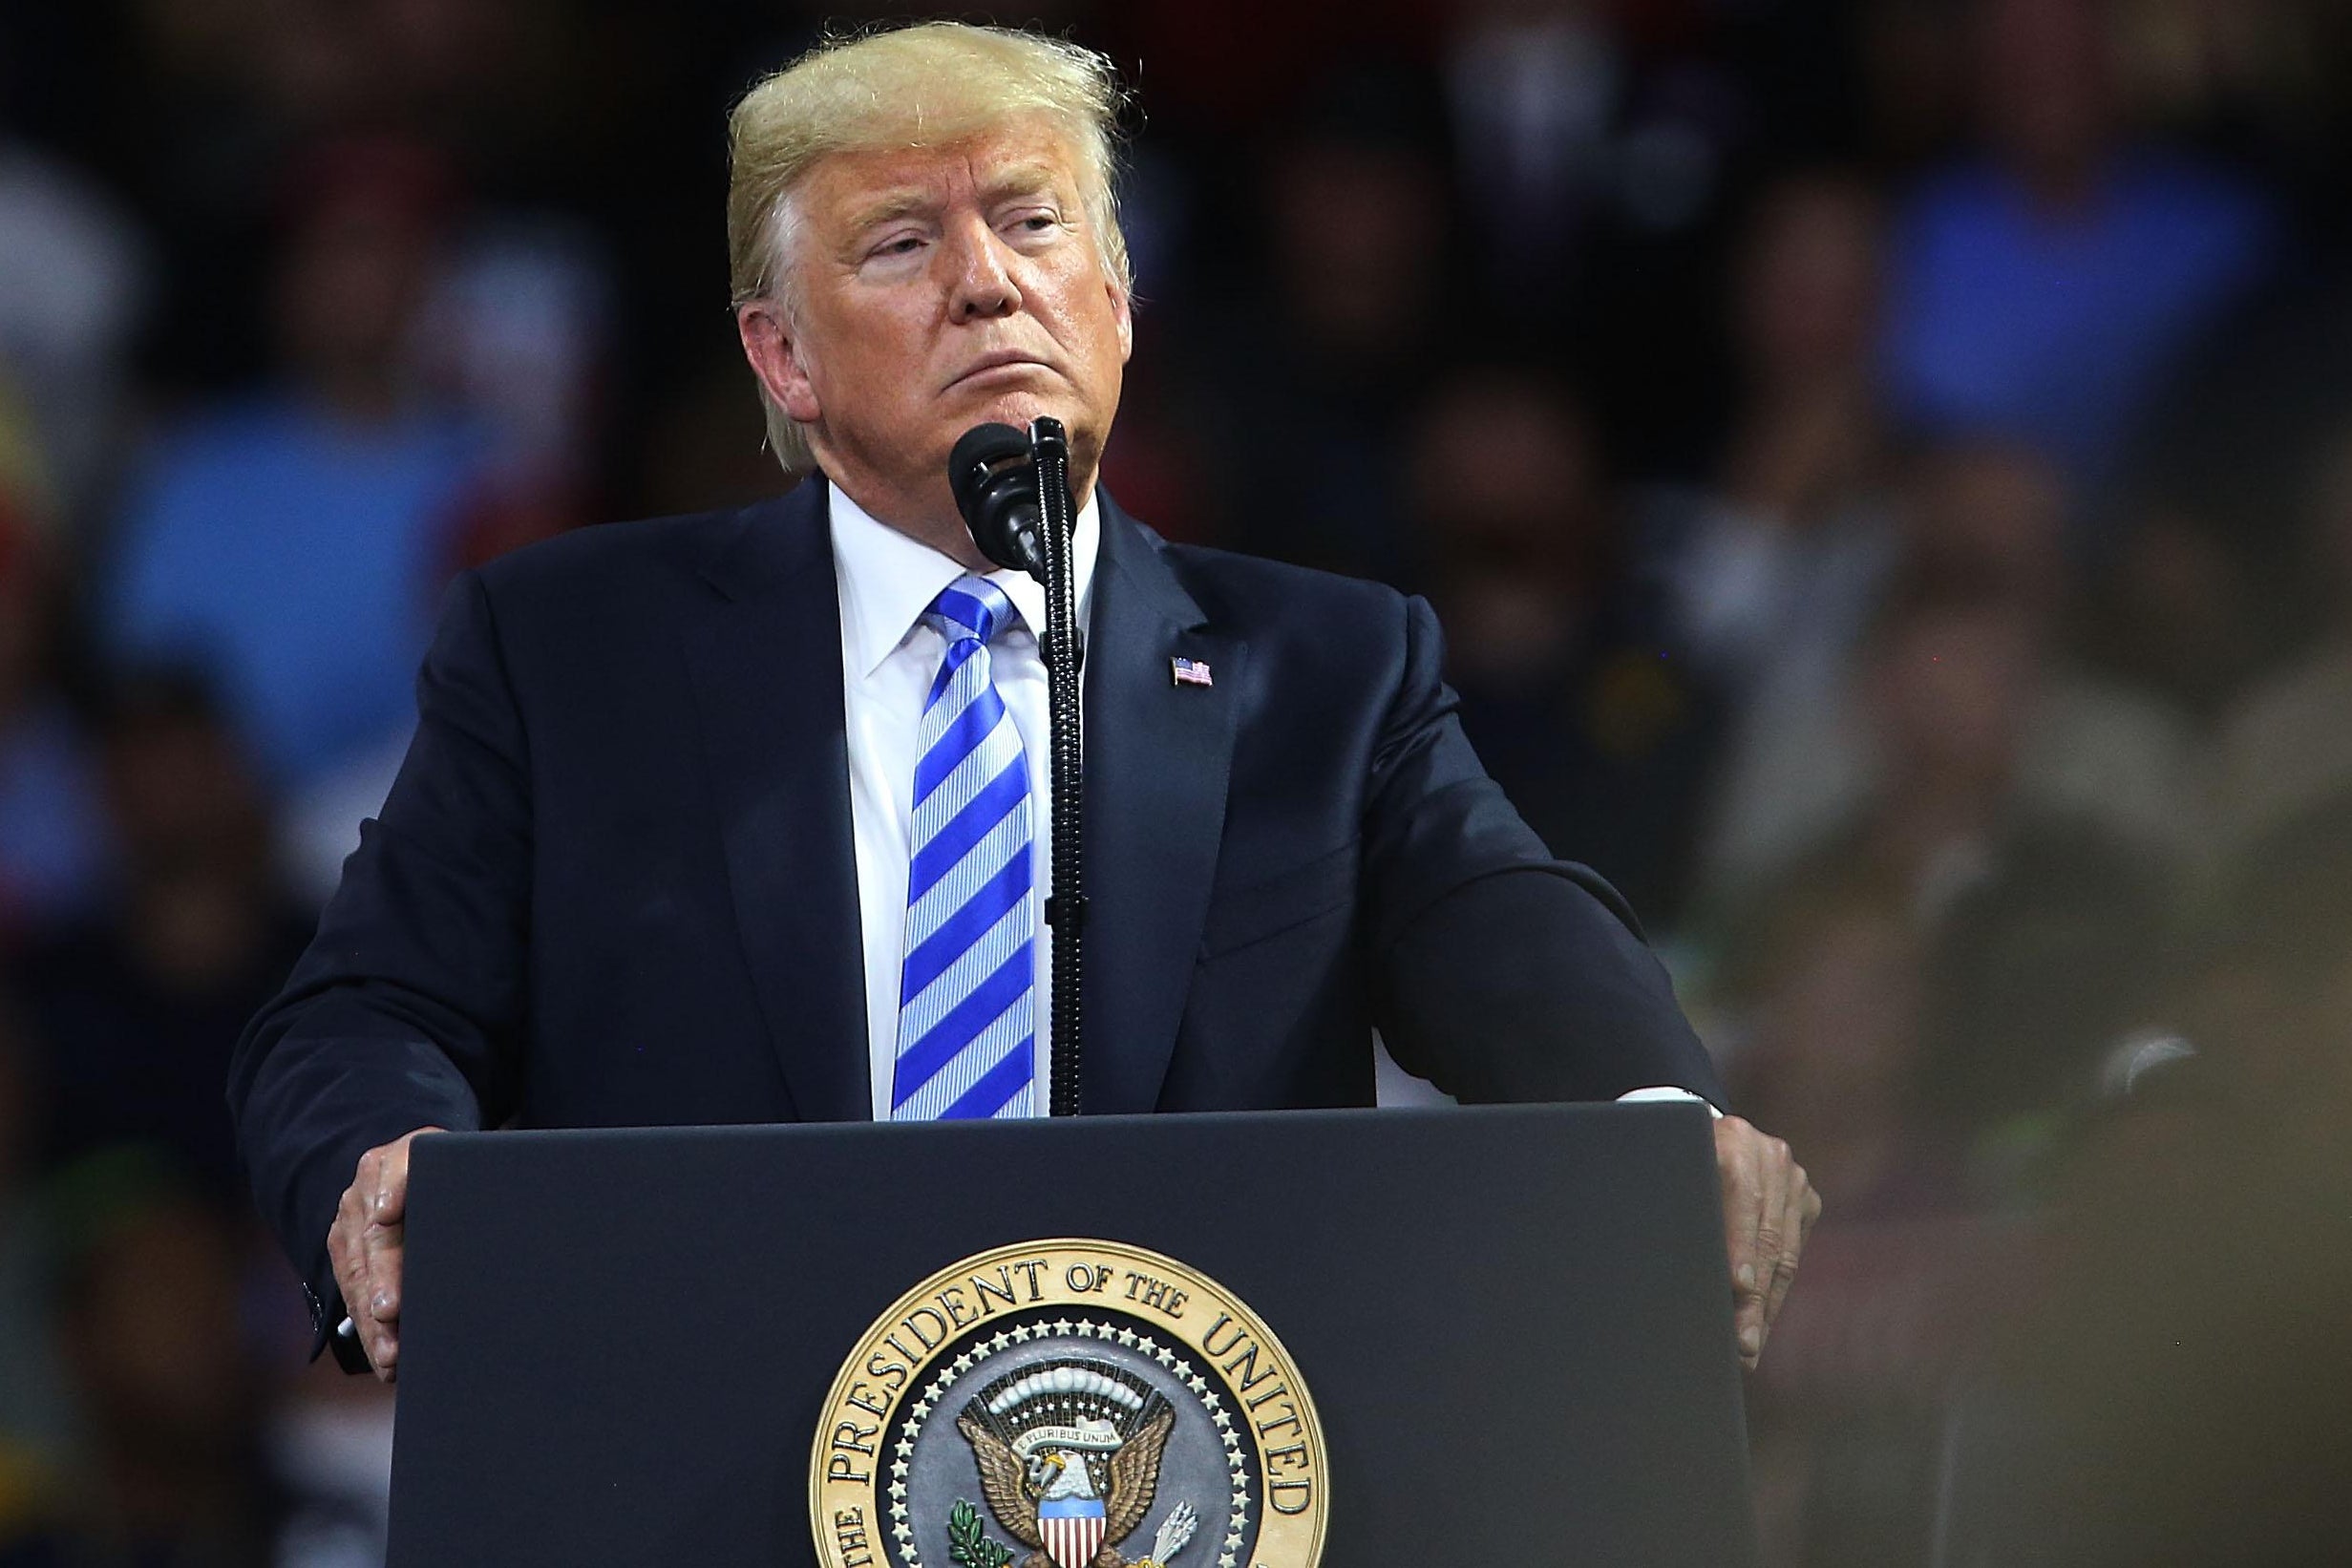 President Donald Trump speaks at a rally at the Charleston Civic Center on August 21, 2018 in Charleston, West Virginia. 